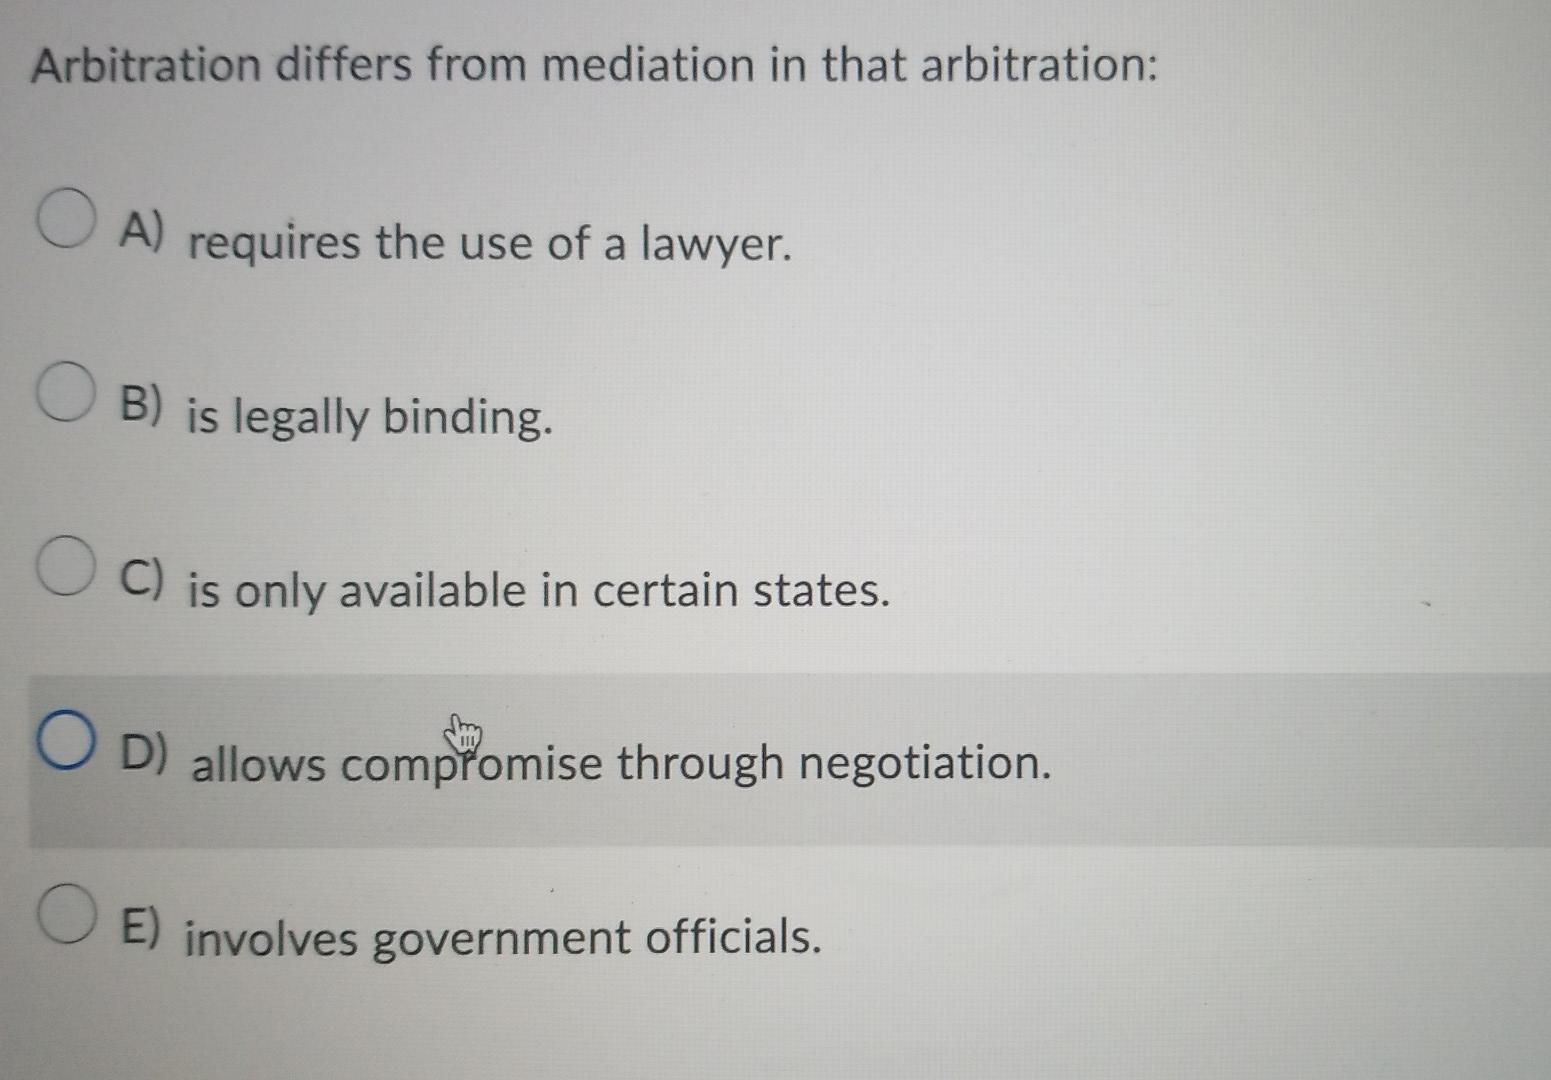 Is Mediation Legally Binding?